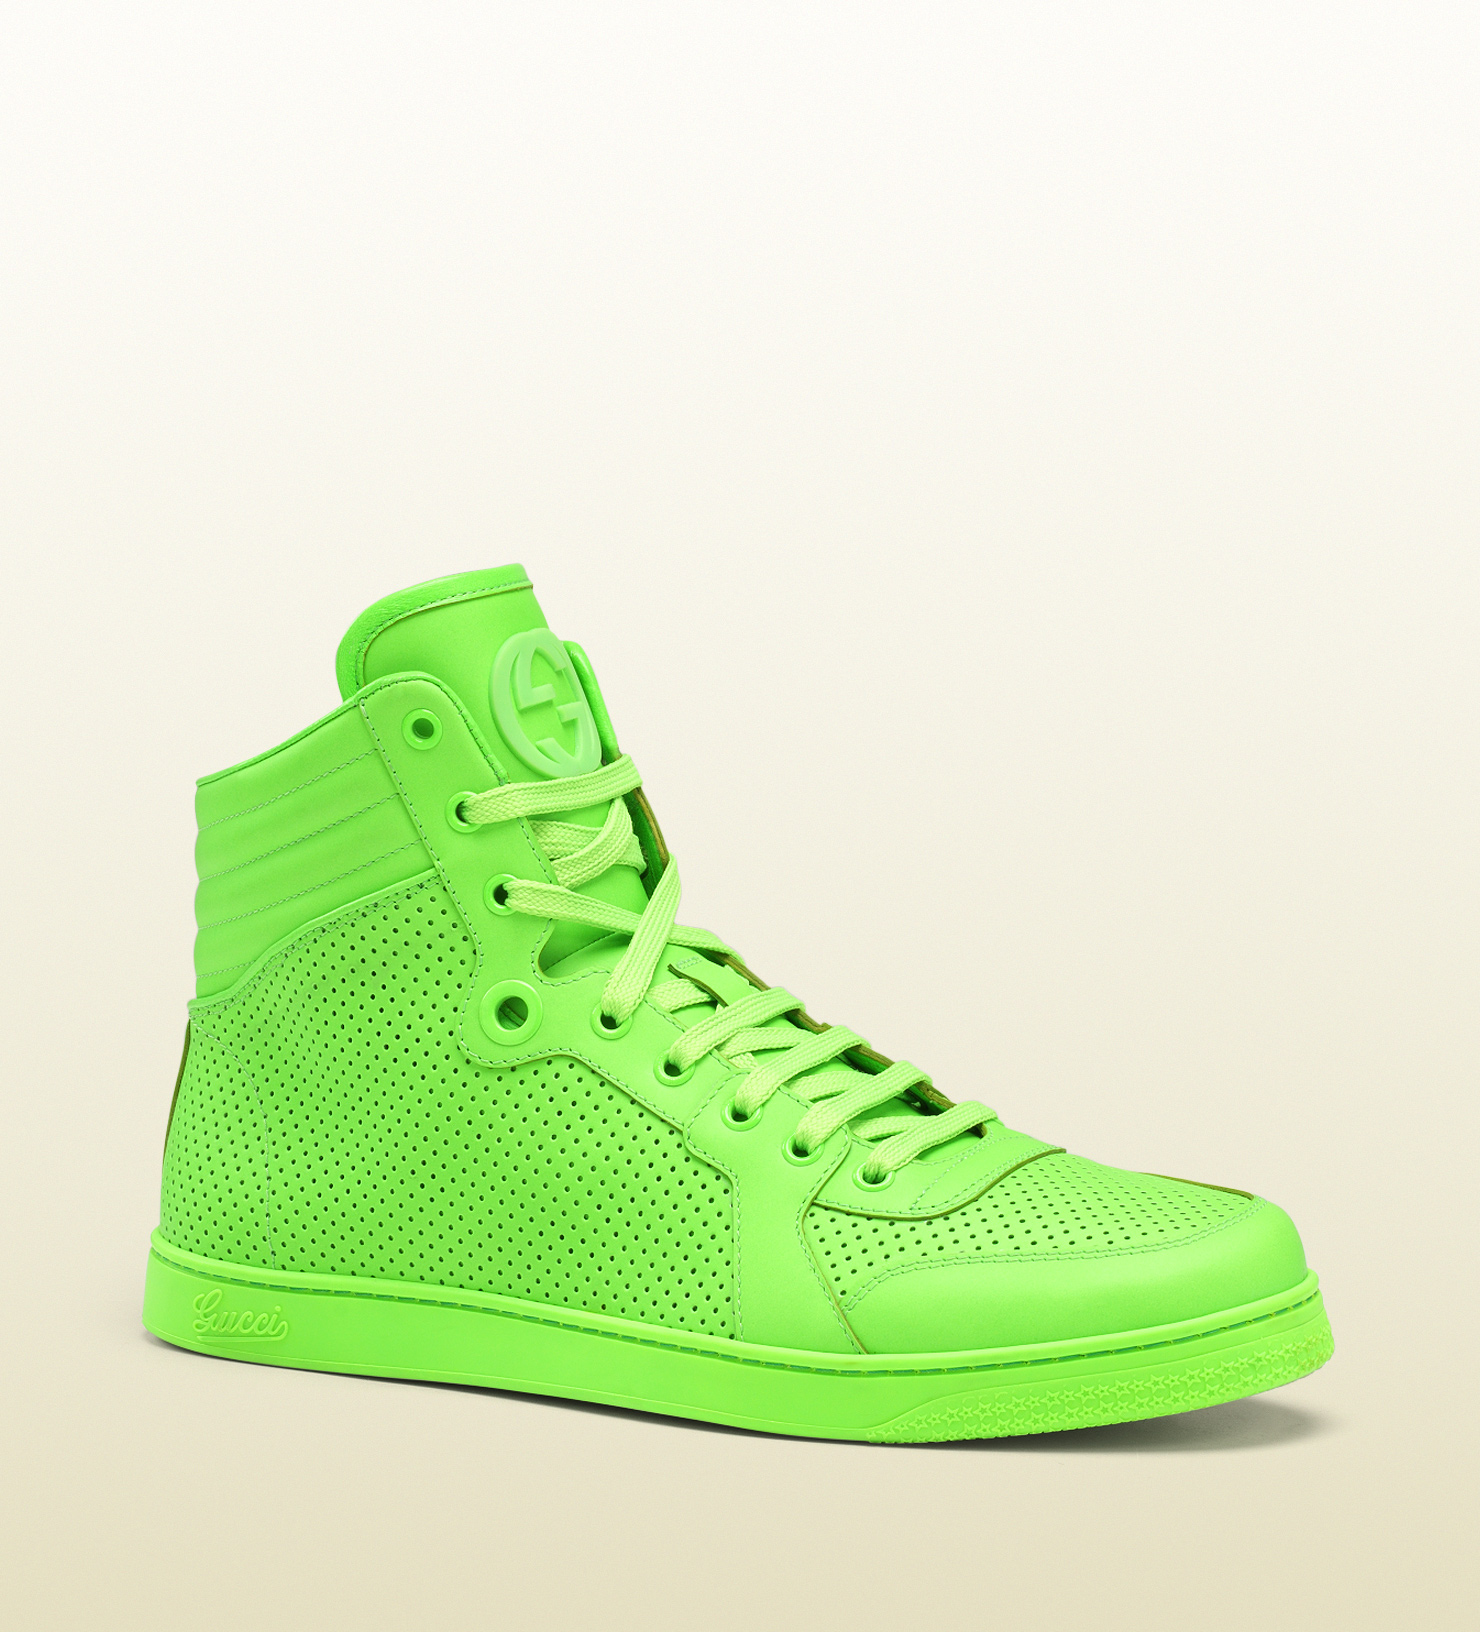 Neon Gucci Sneakers